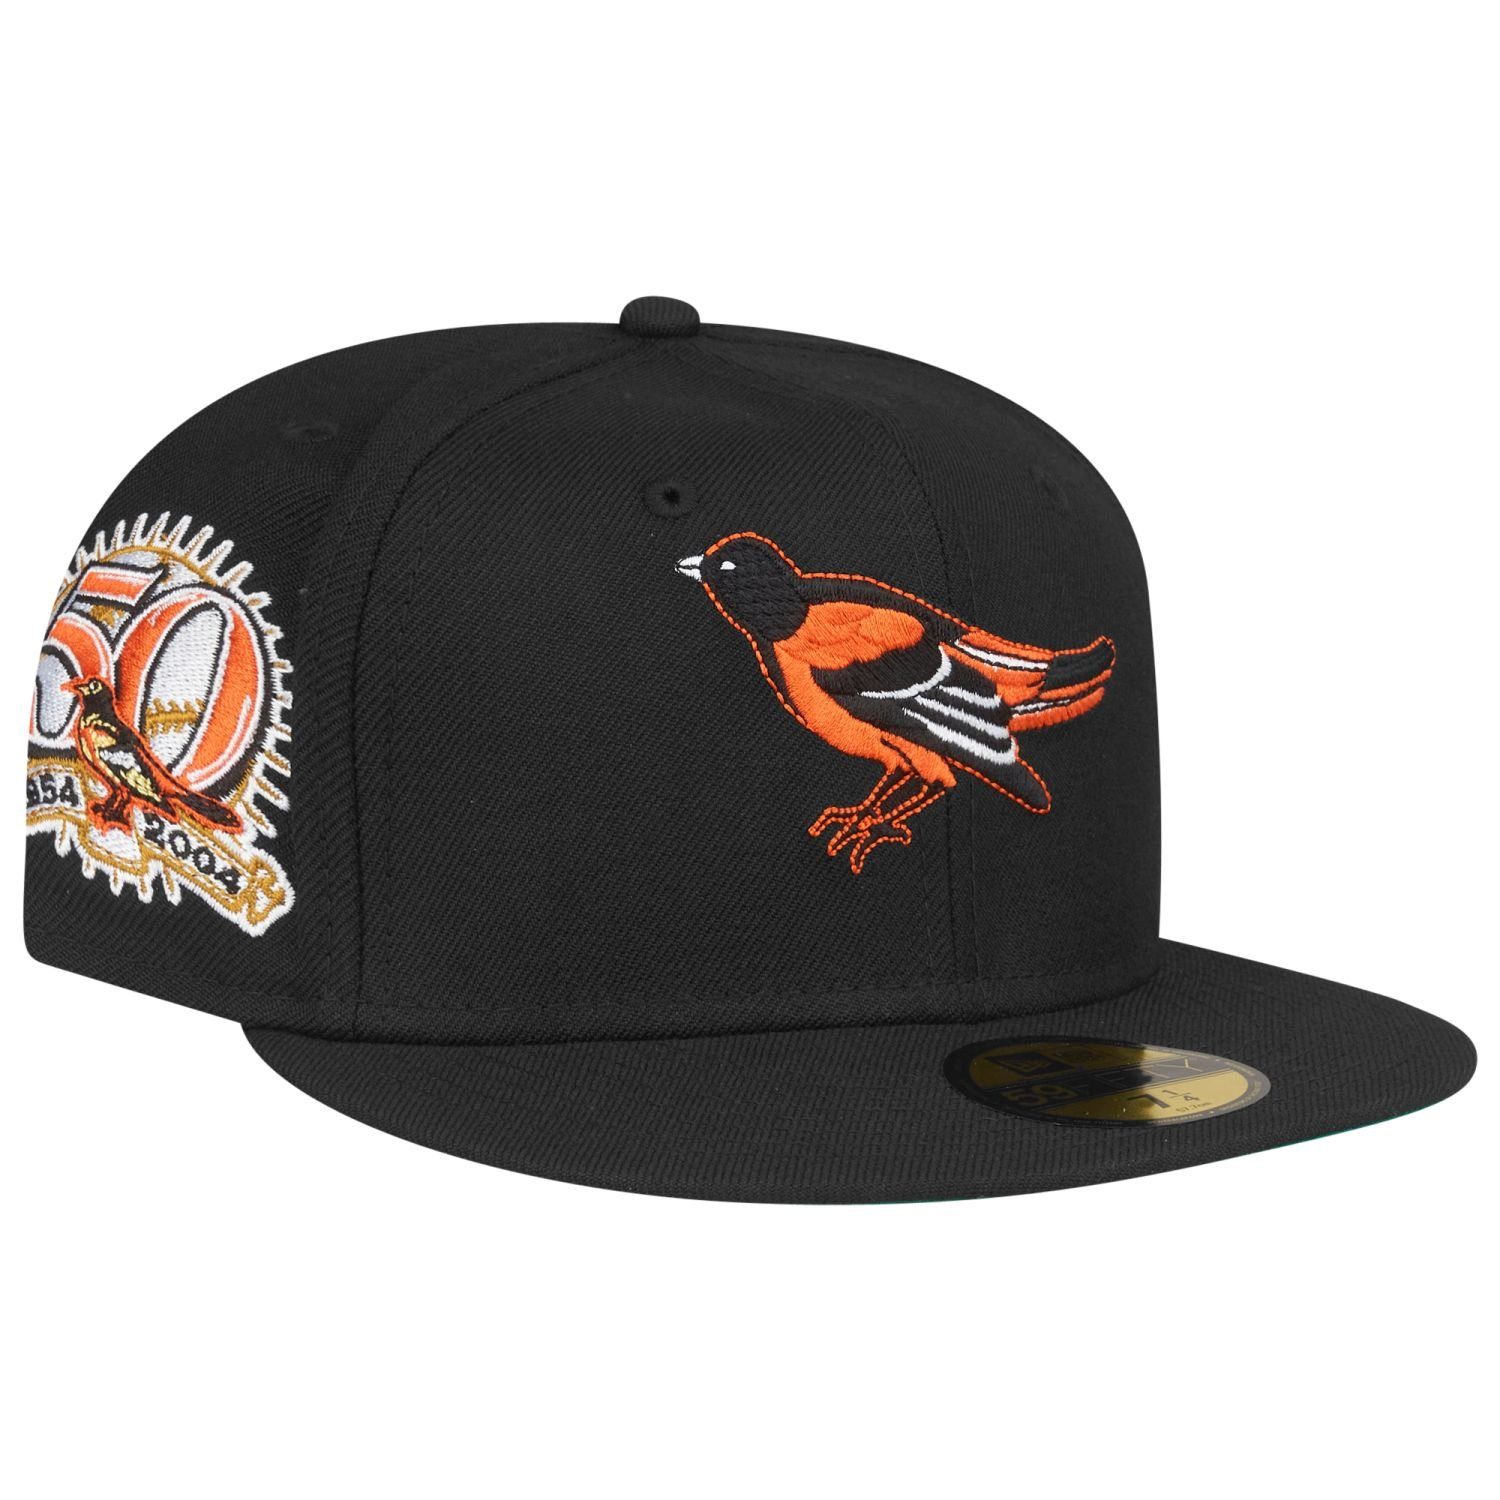 Fitted 59Fifty Baltimore Cap New Era Orioles COOPERSTOWN